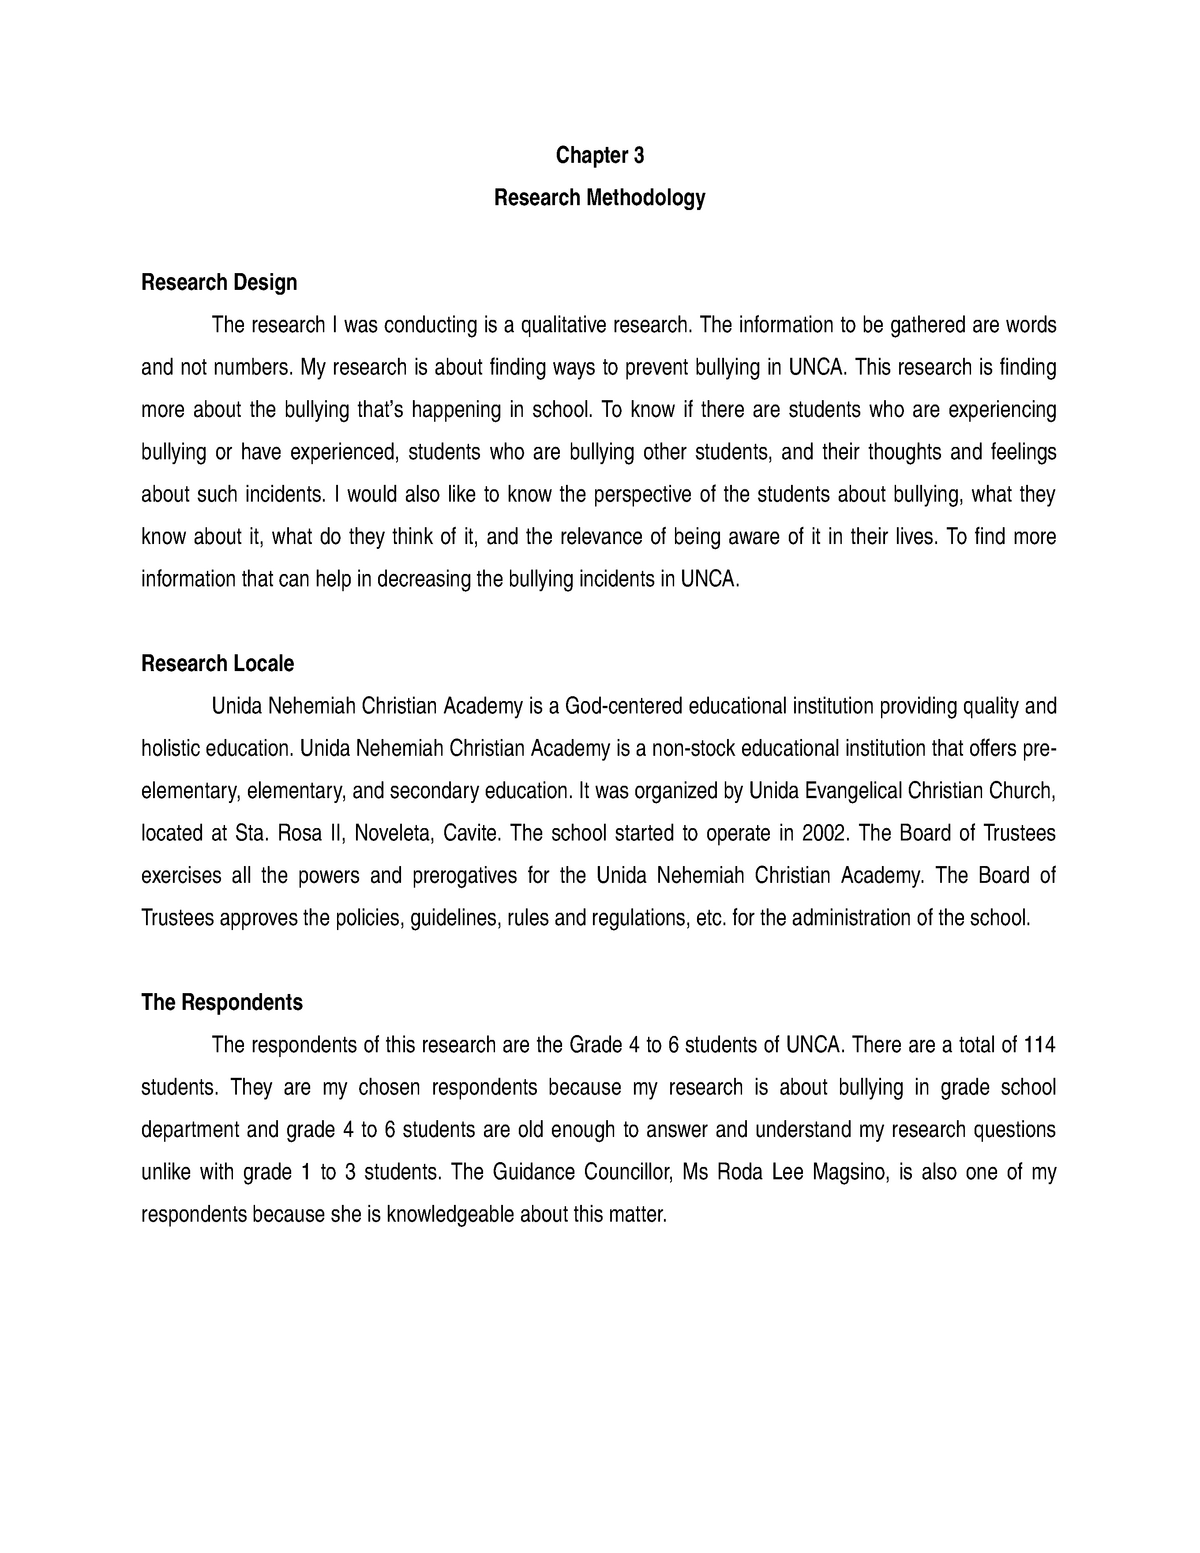 chapter 3 methodology about bullying qualitative research